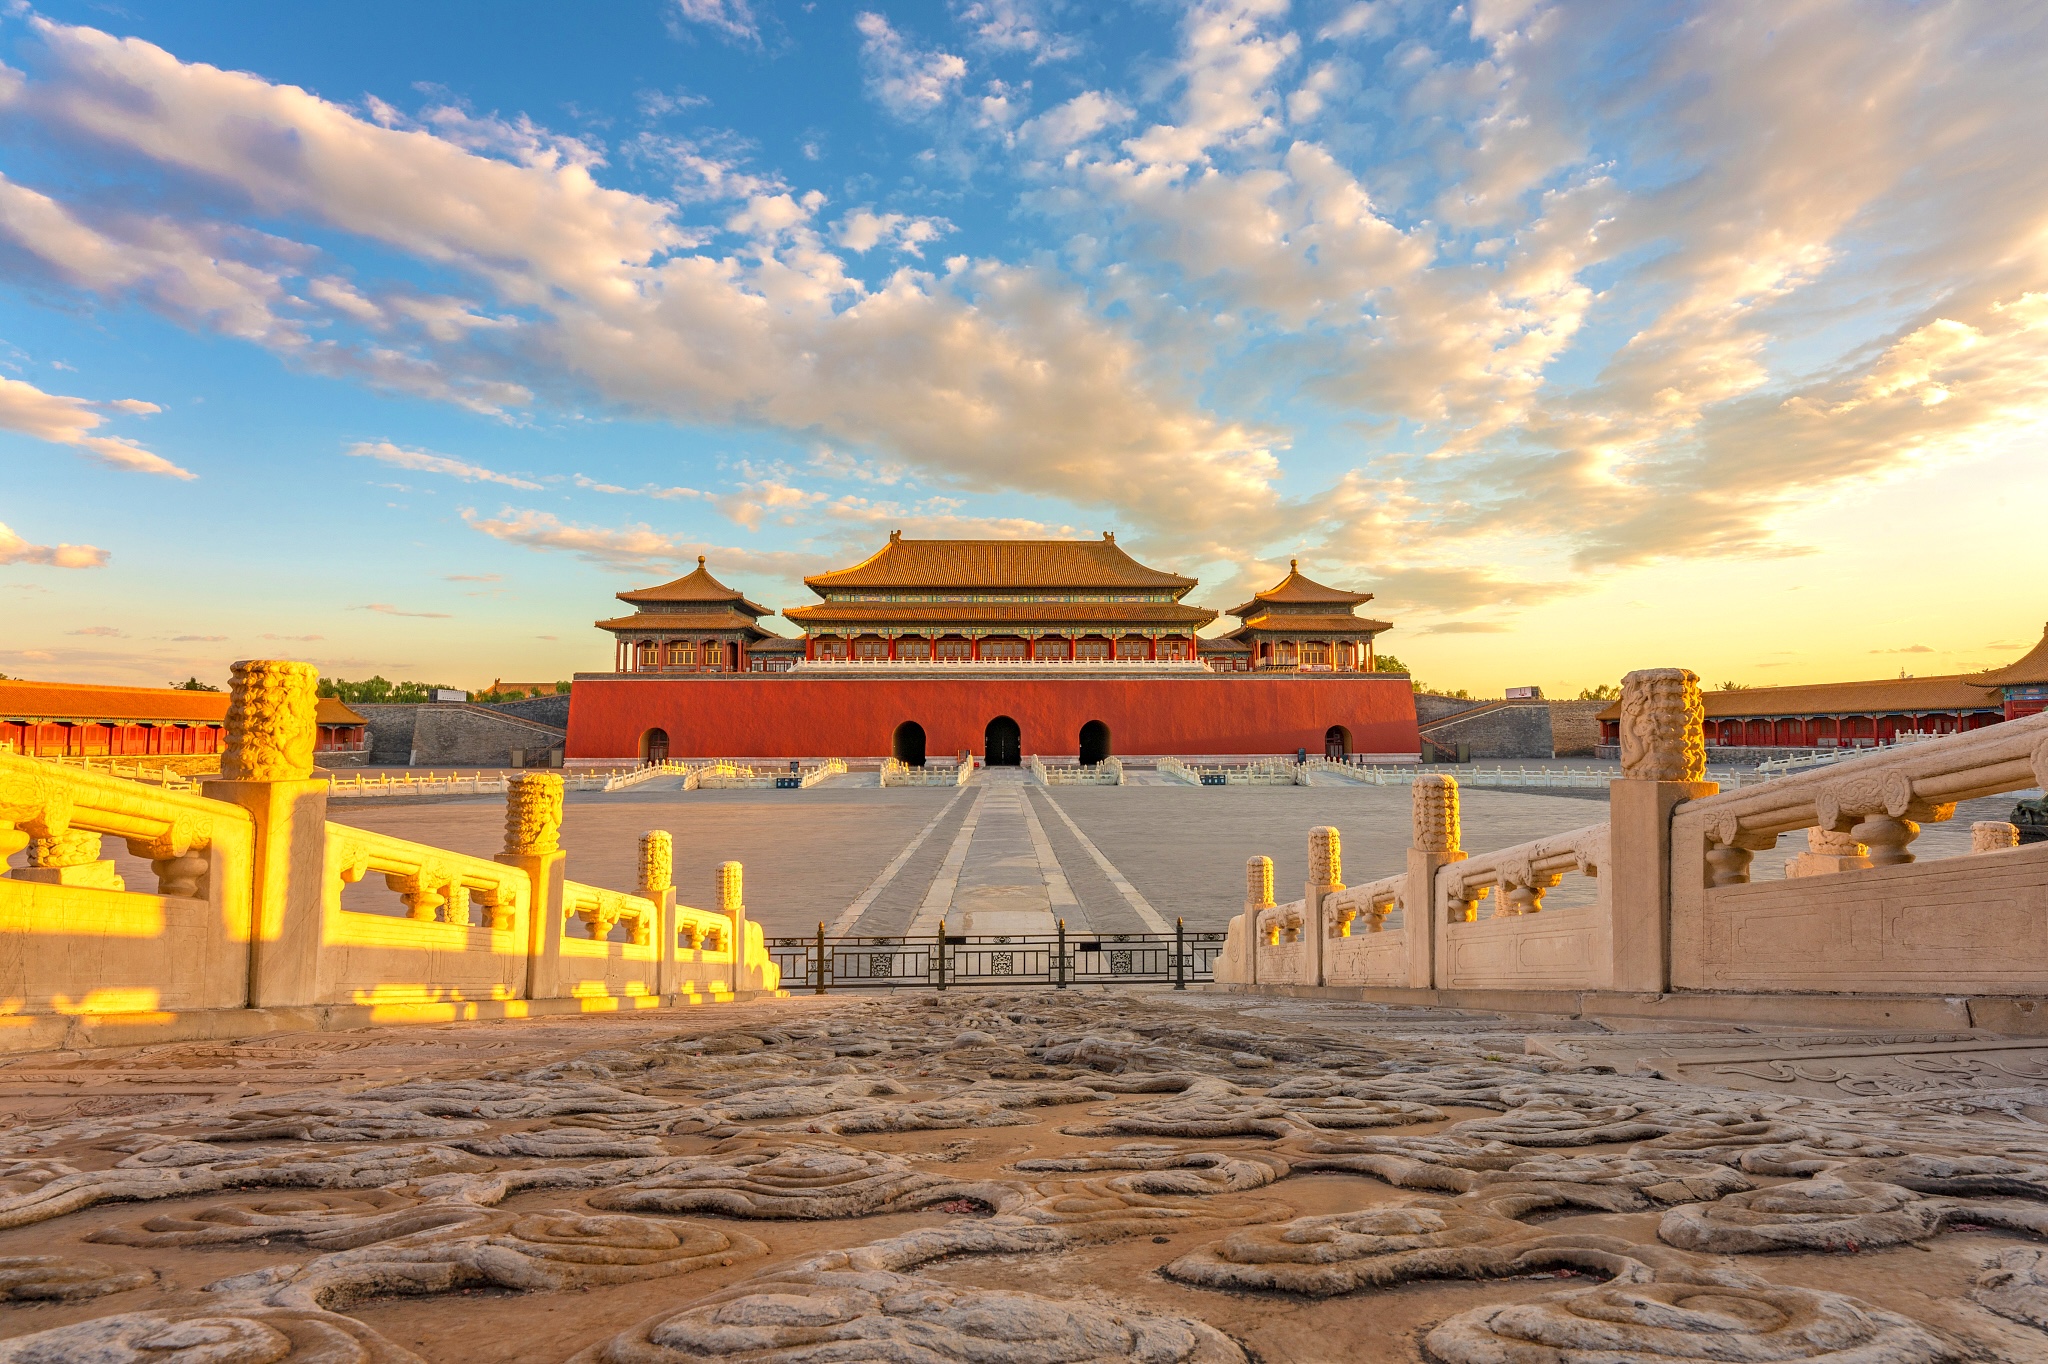 A file photo shows the Forbidden City at sunset in Beijing. /CFP